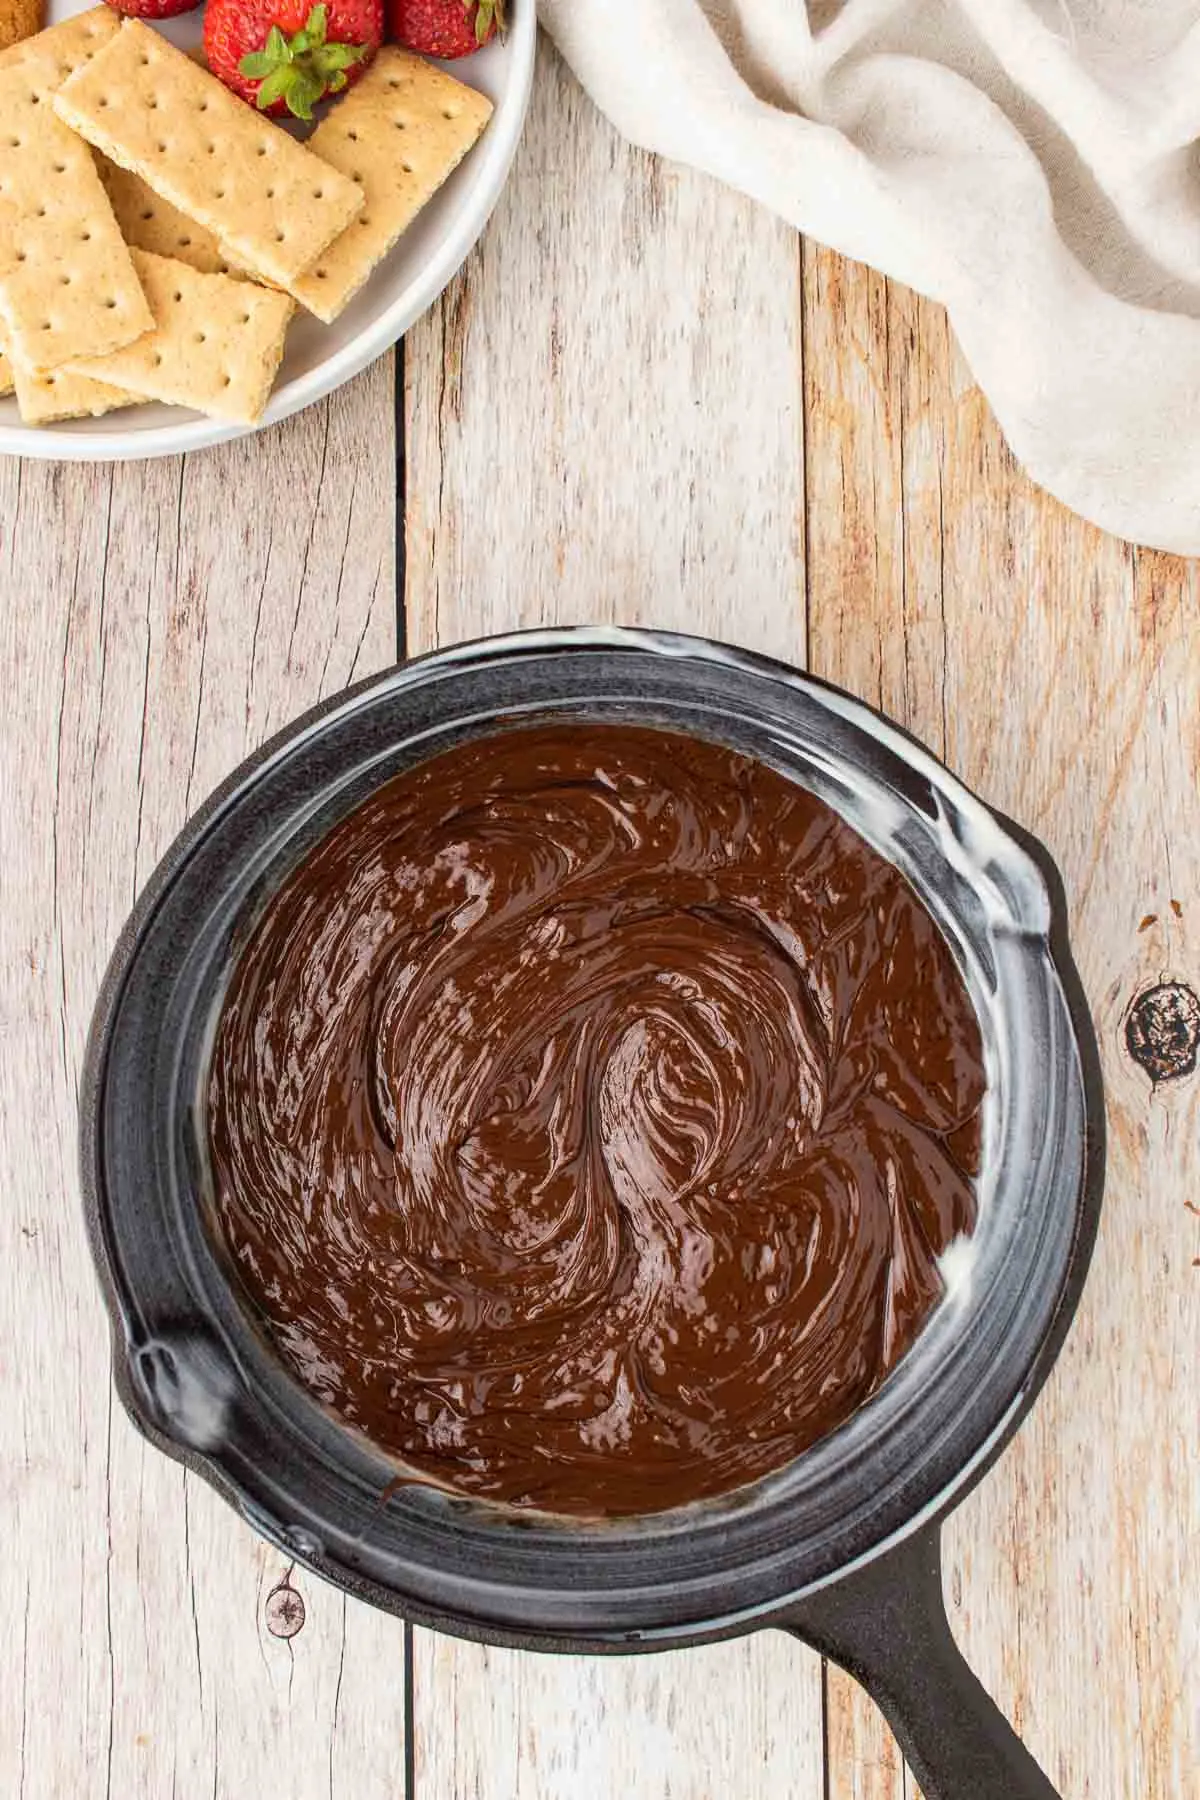 melted chocolate mixture in a cast iron skillet